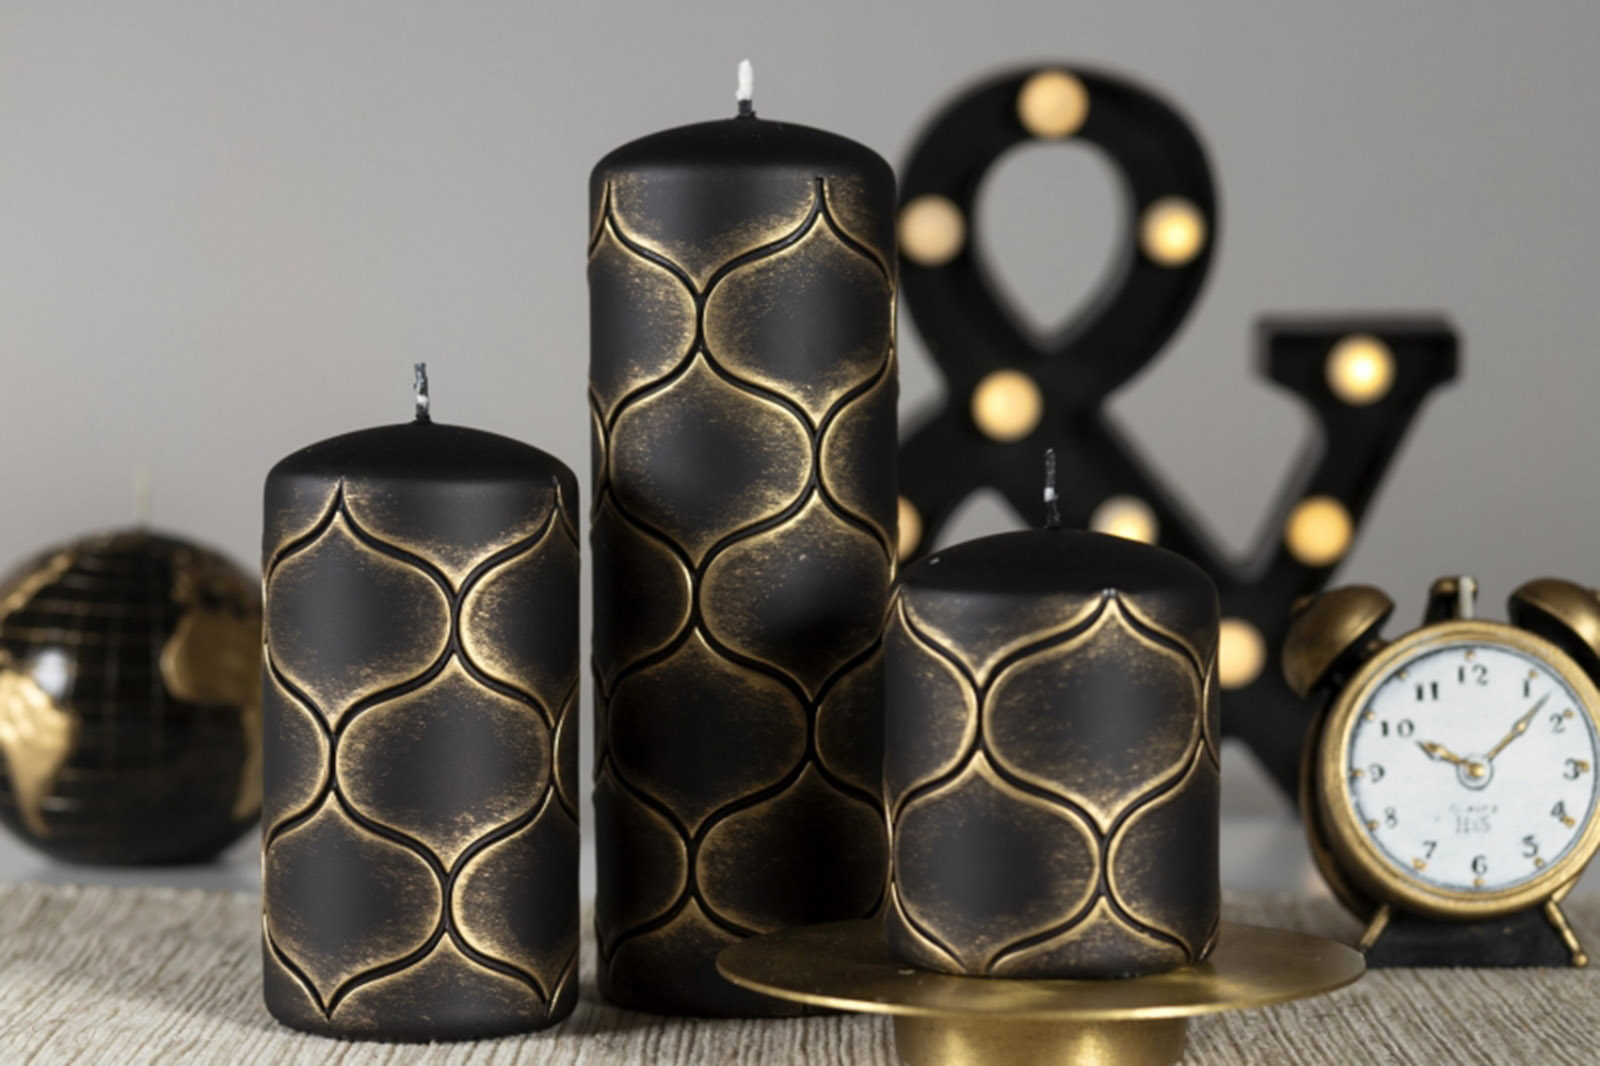 Three pillar candles with golden Moroccan pattern beside vintage alarm clock and globe